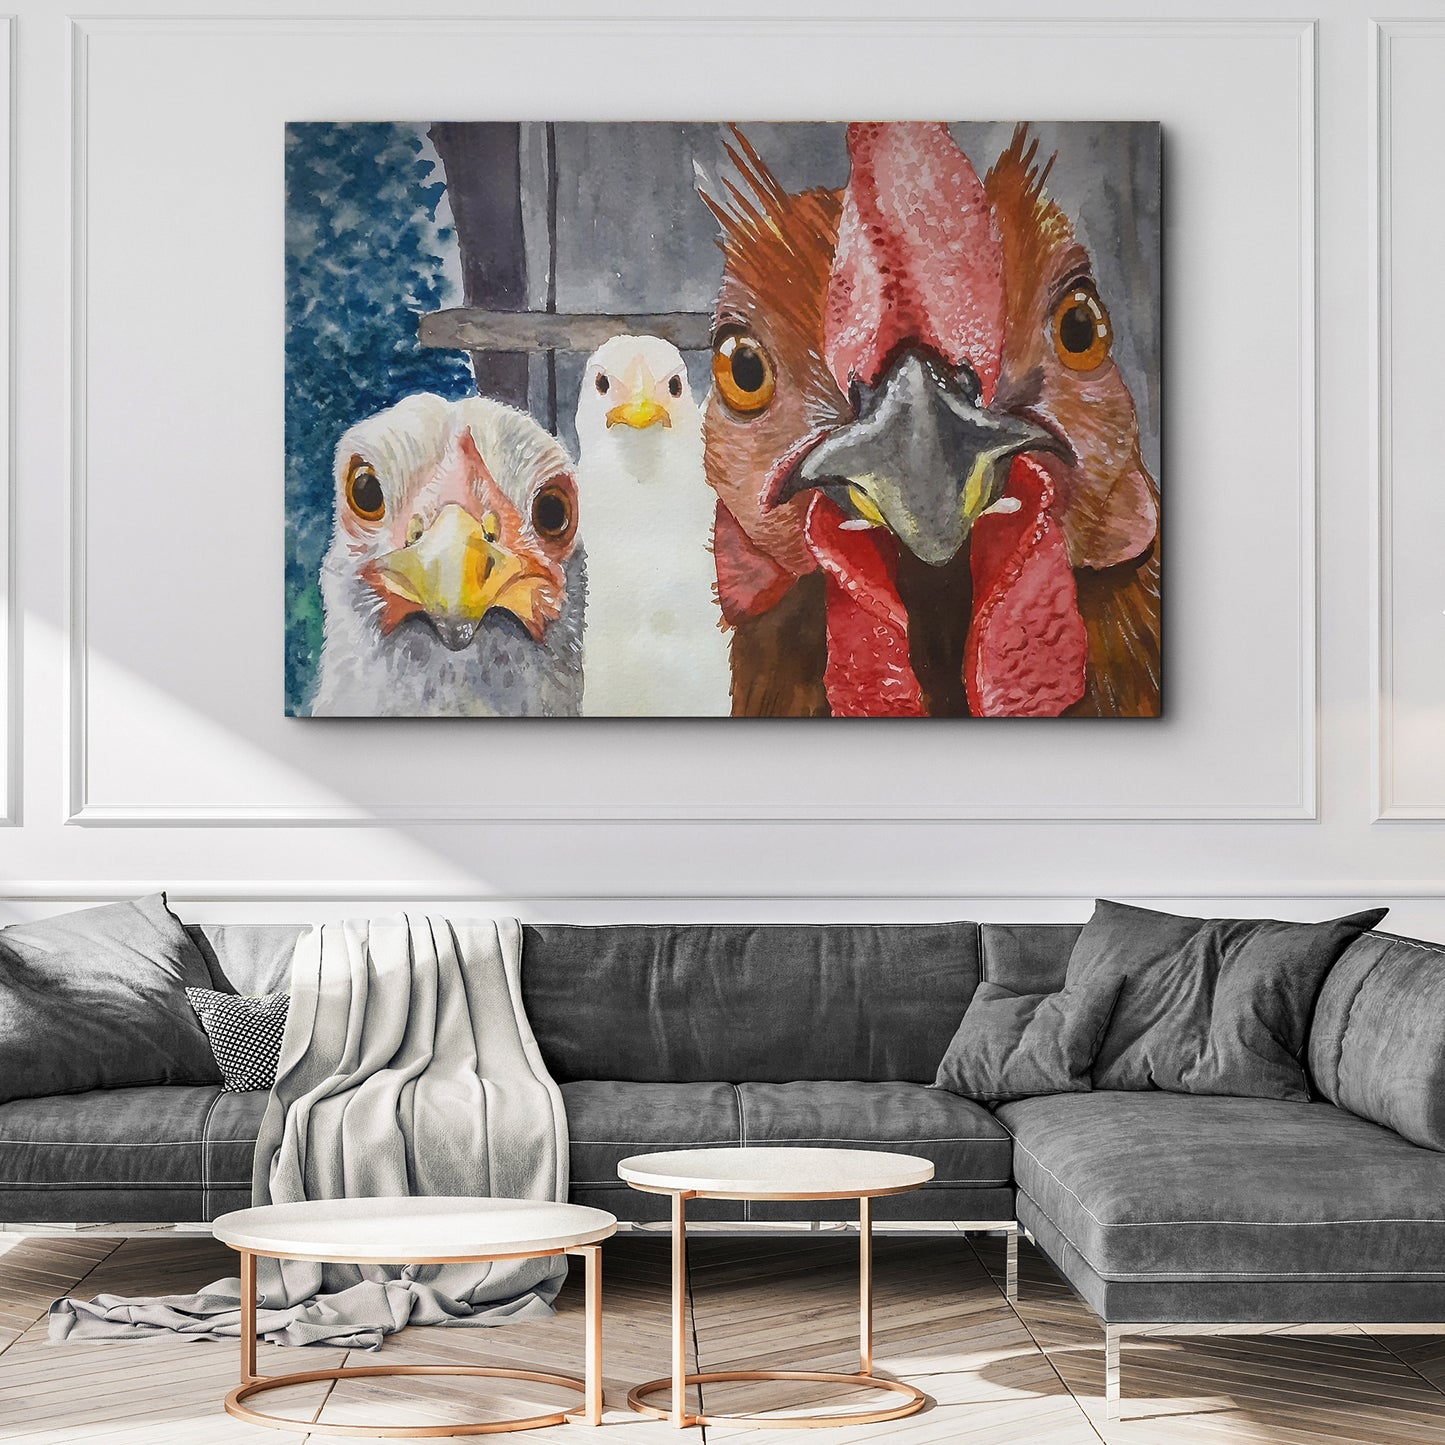 Chicken Heads Painting Canvas Wall Art Style 2 - Image by Tailored Canvases